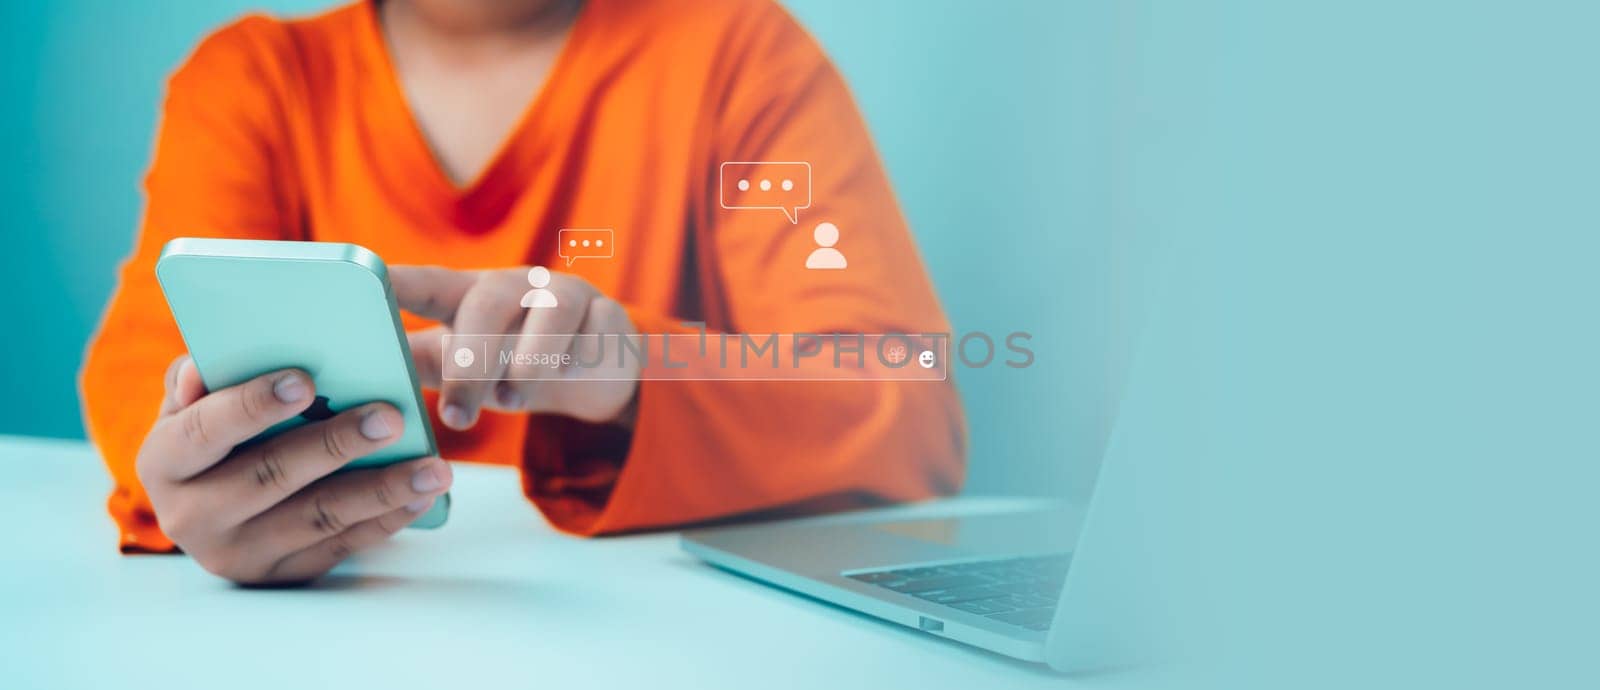 Woman hand using smartphone typing live chat chatting on application communication digital web and social network concept. Social media application chat box.